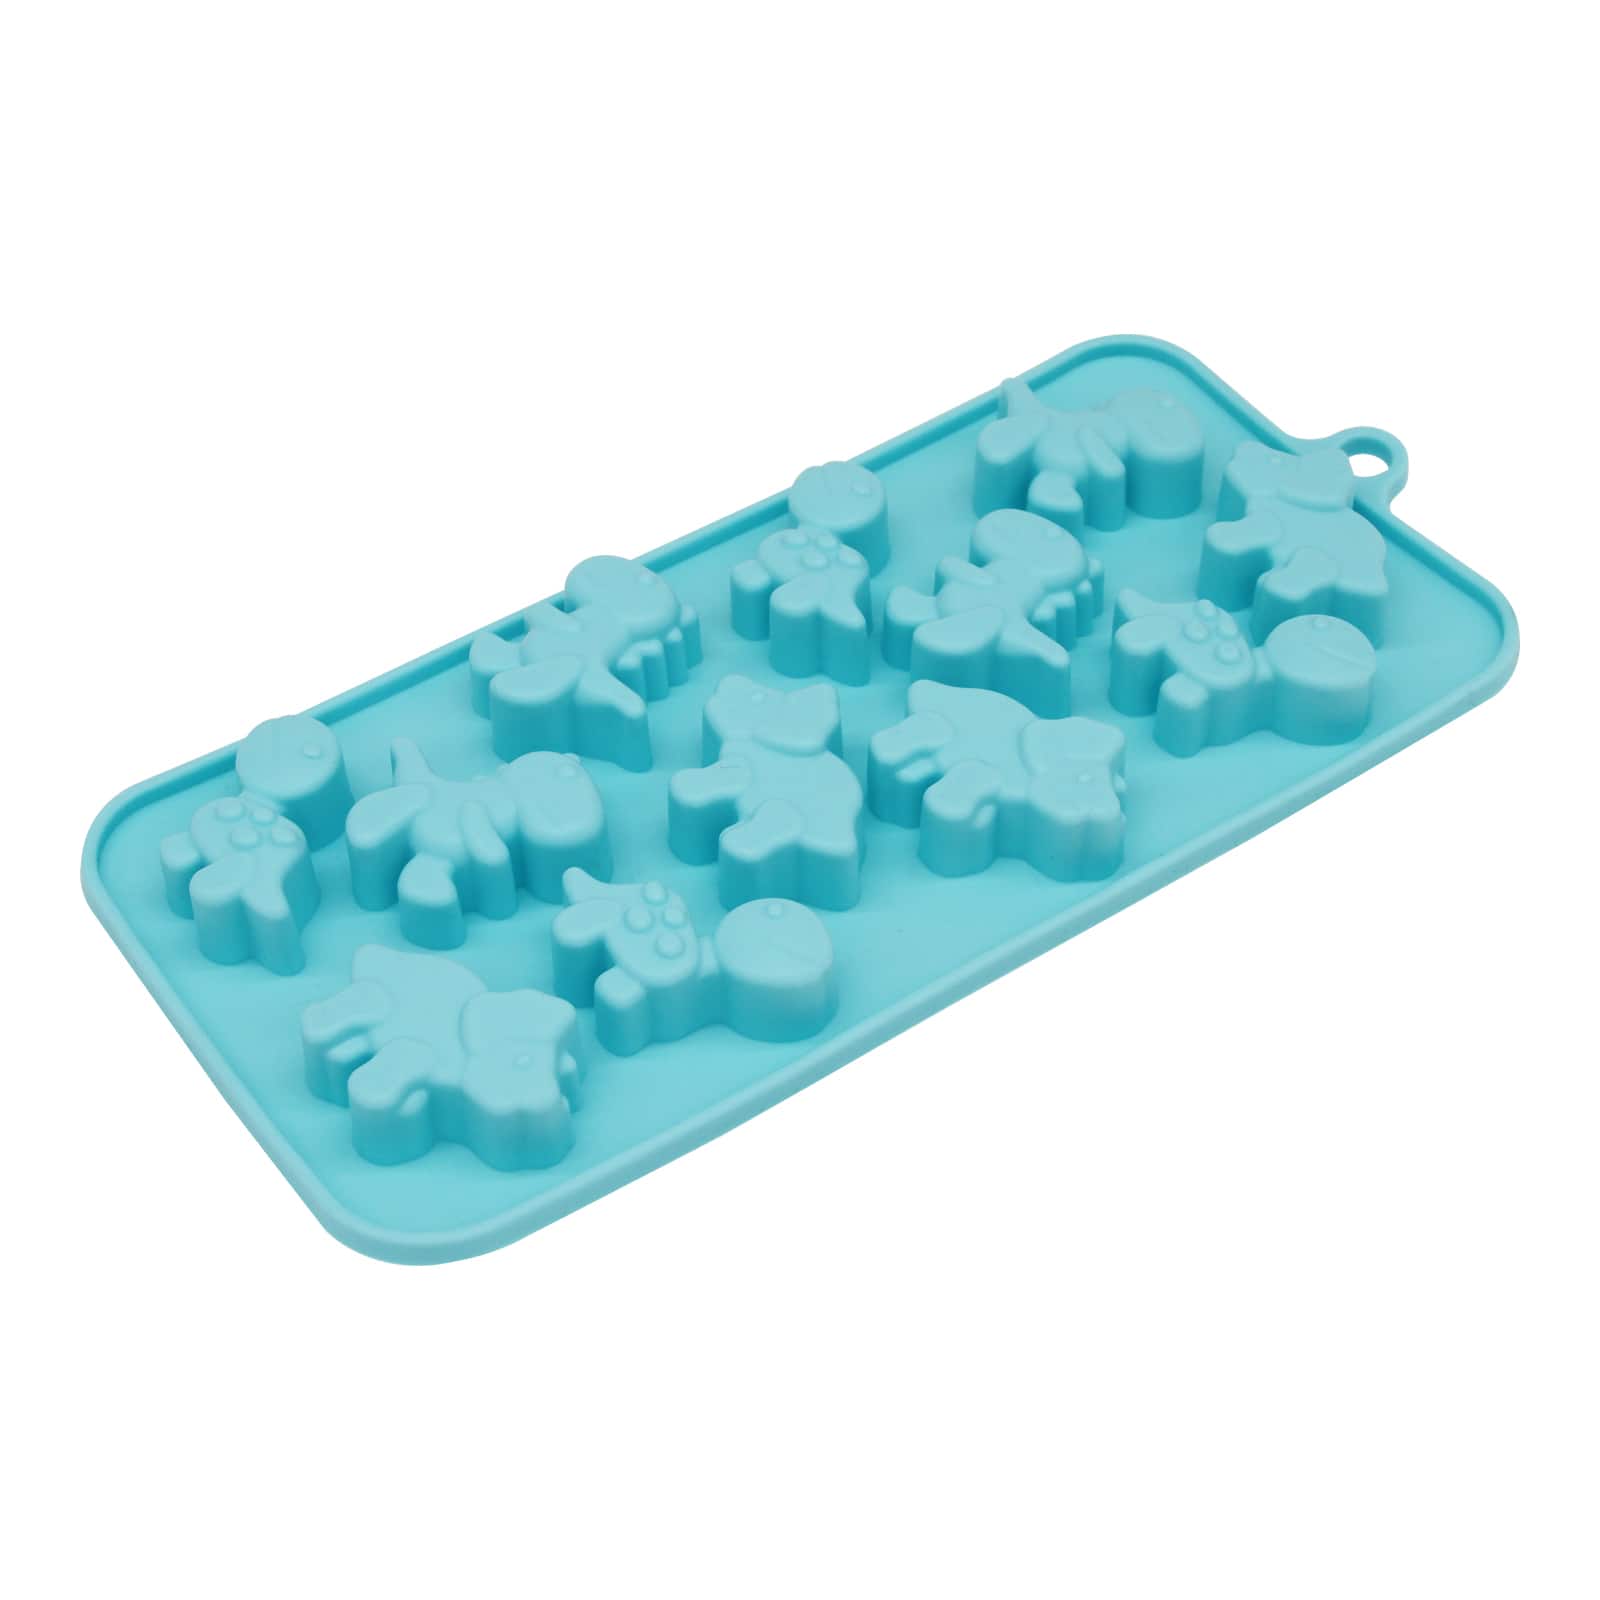 Win&co Dinosaur Ice Trays/Chocolate Molds and 100% Food Grade Pure Silicone, Set of 2